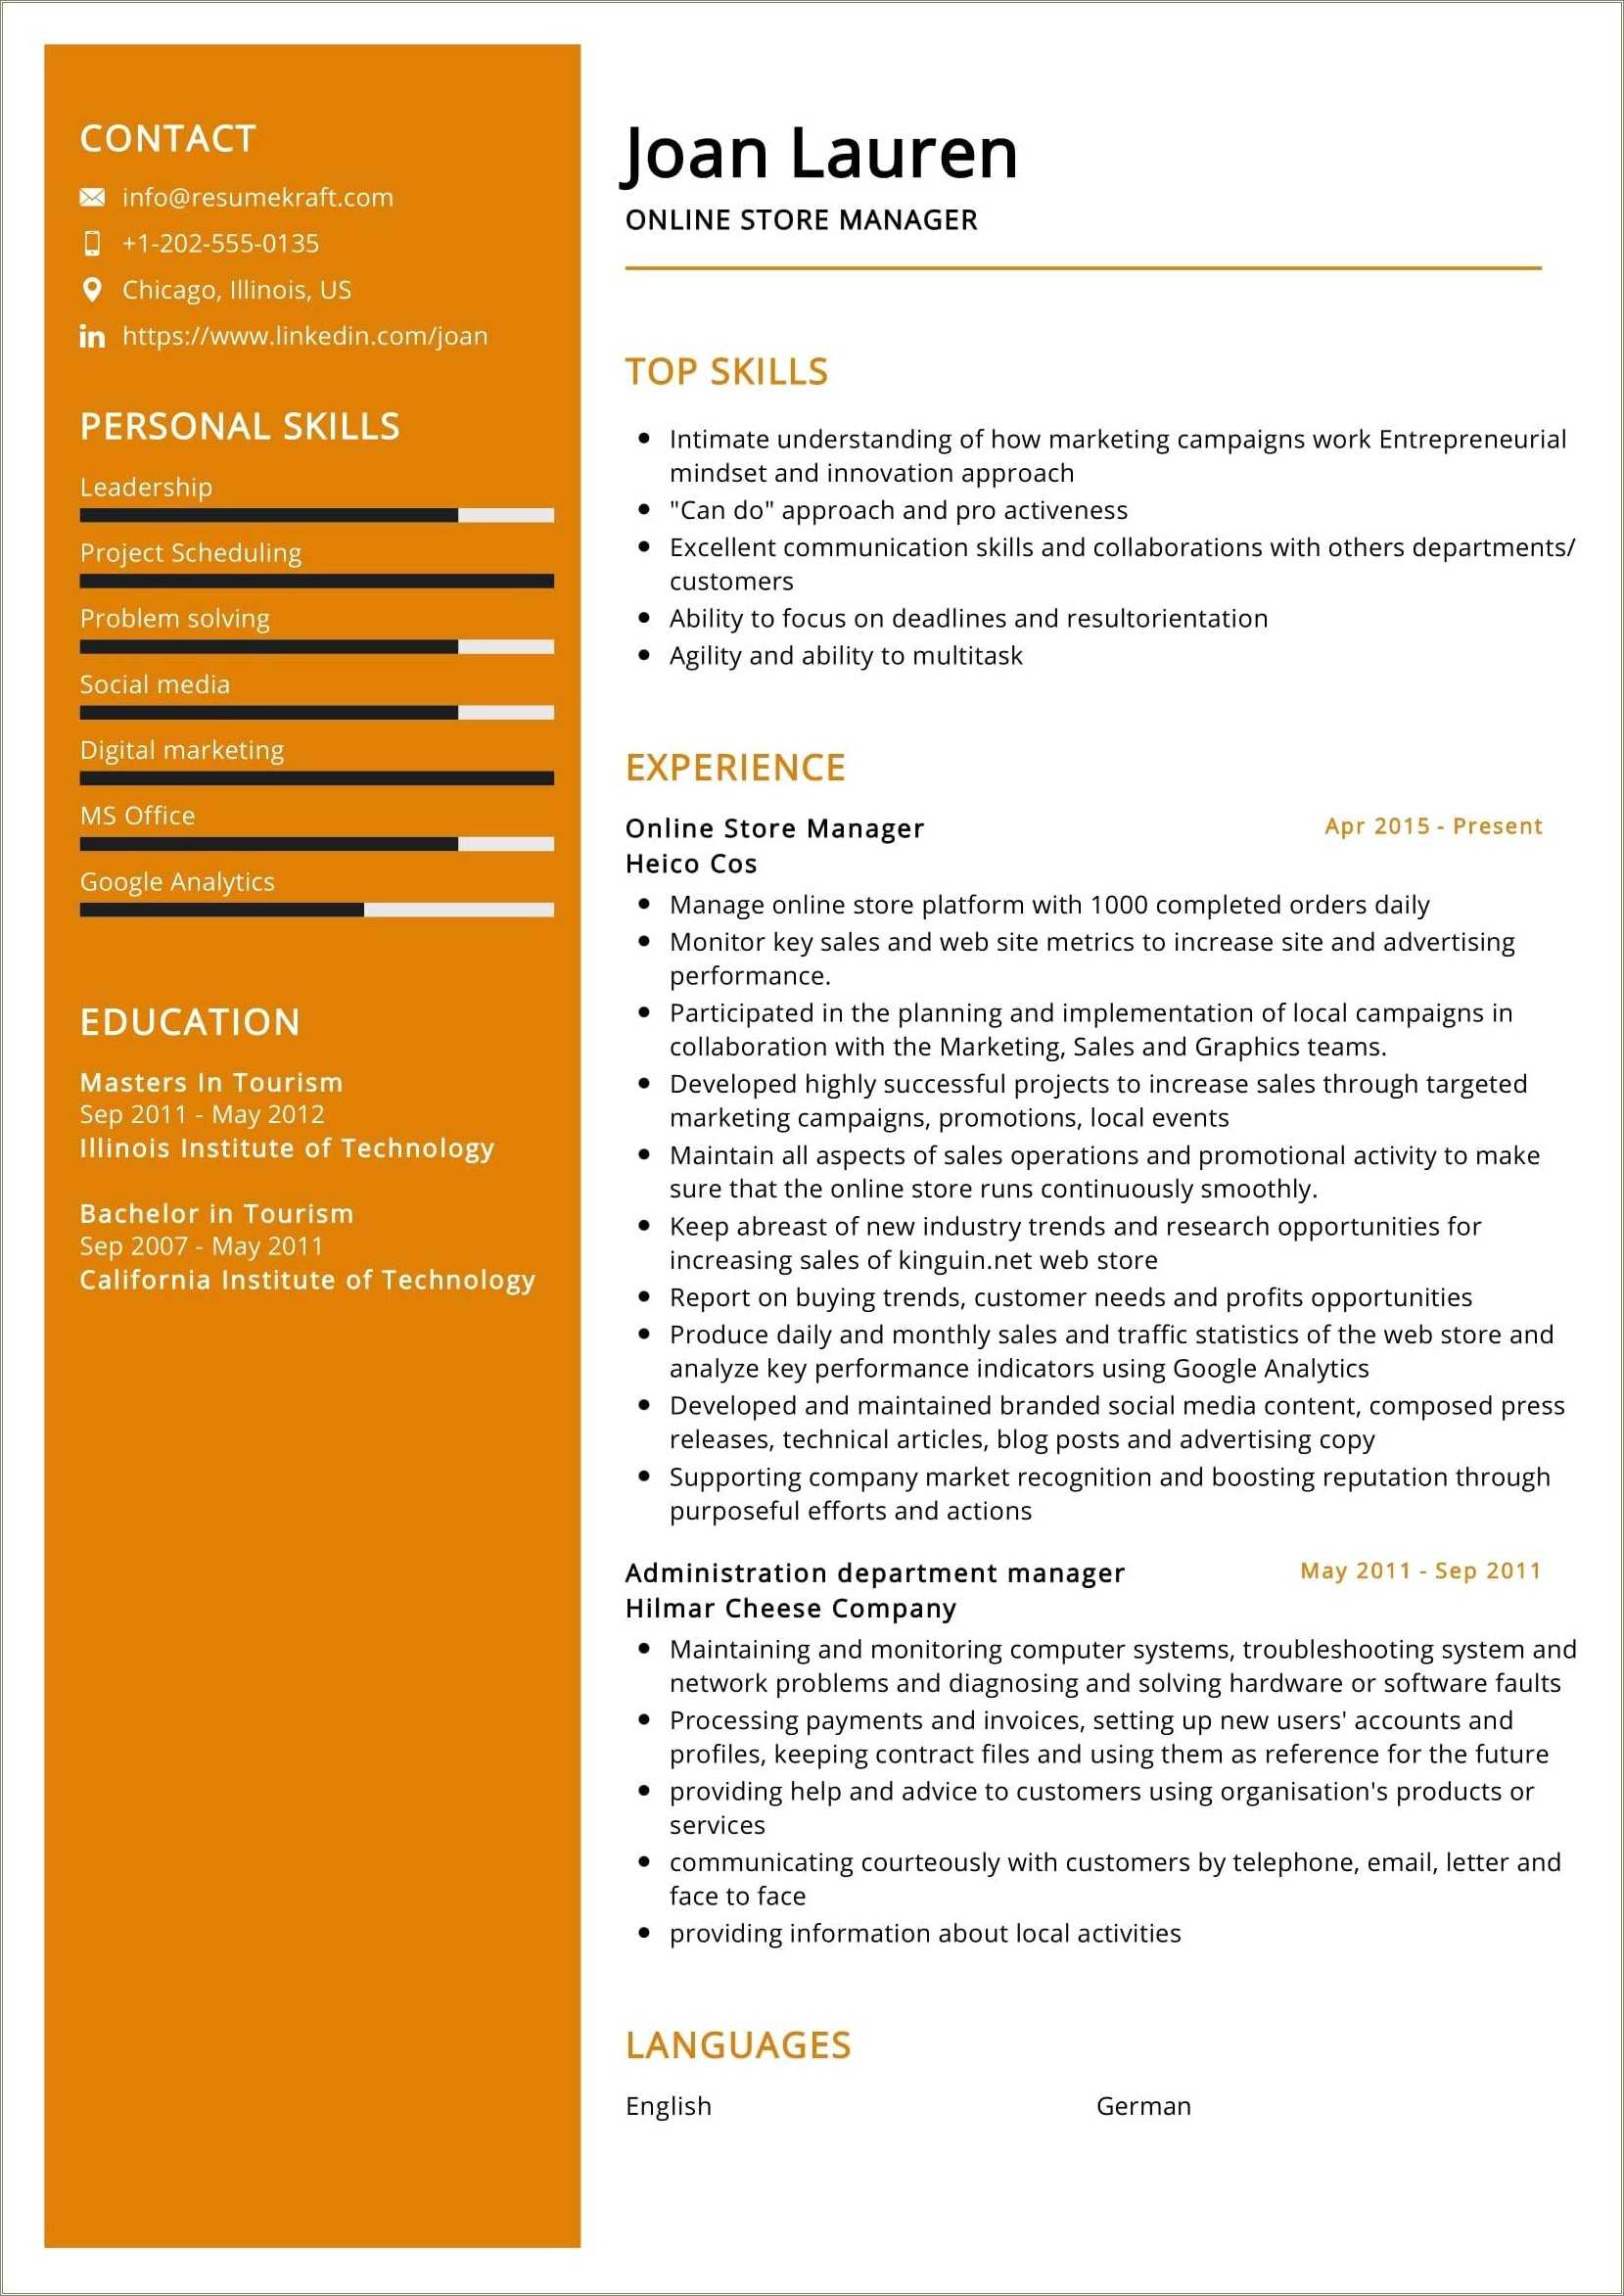 Commonly Used Word Synonyms In Resumes Resume Example Gallery